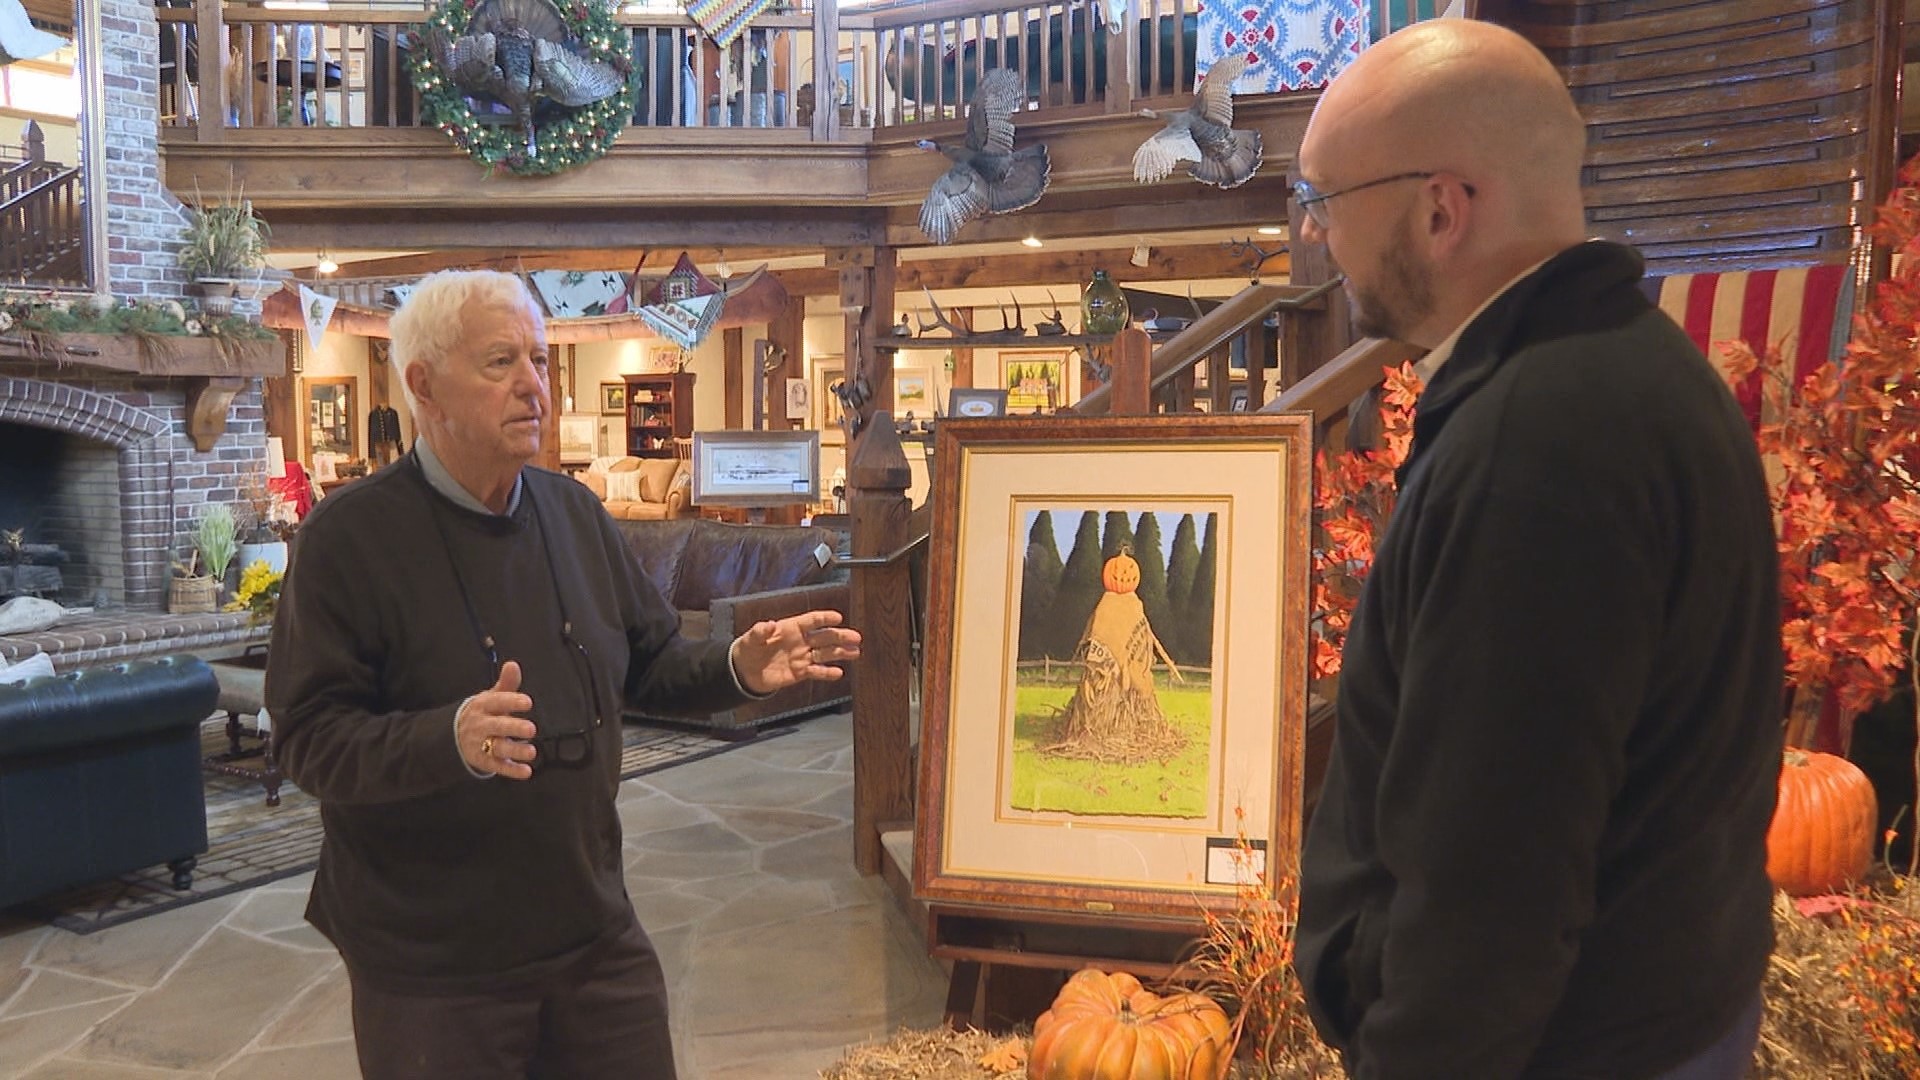 Ben Briscoe sits down with the Lexington native to talk about his world-famous art.